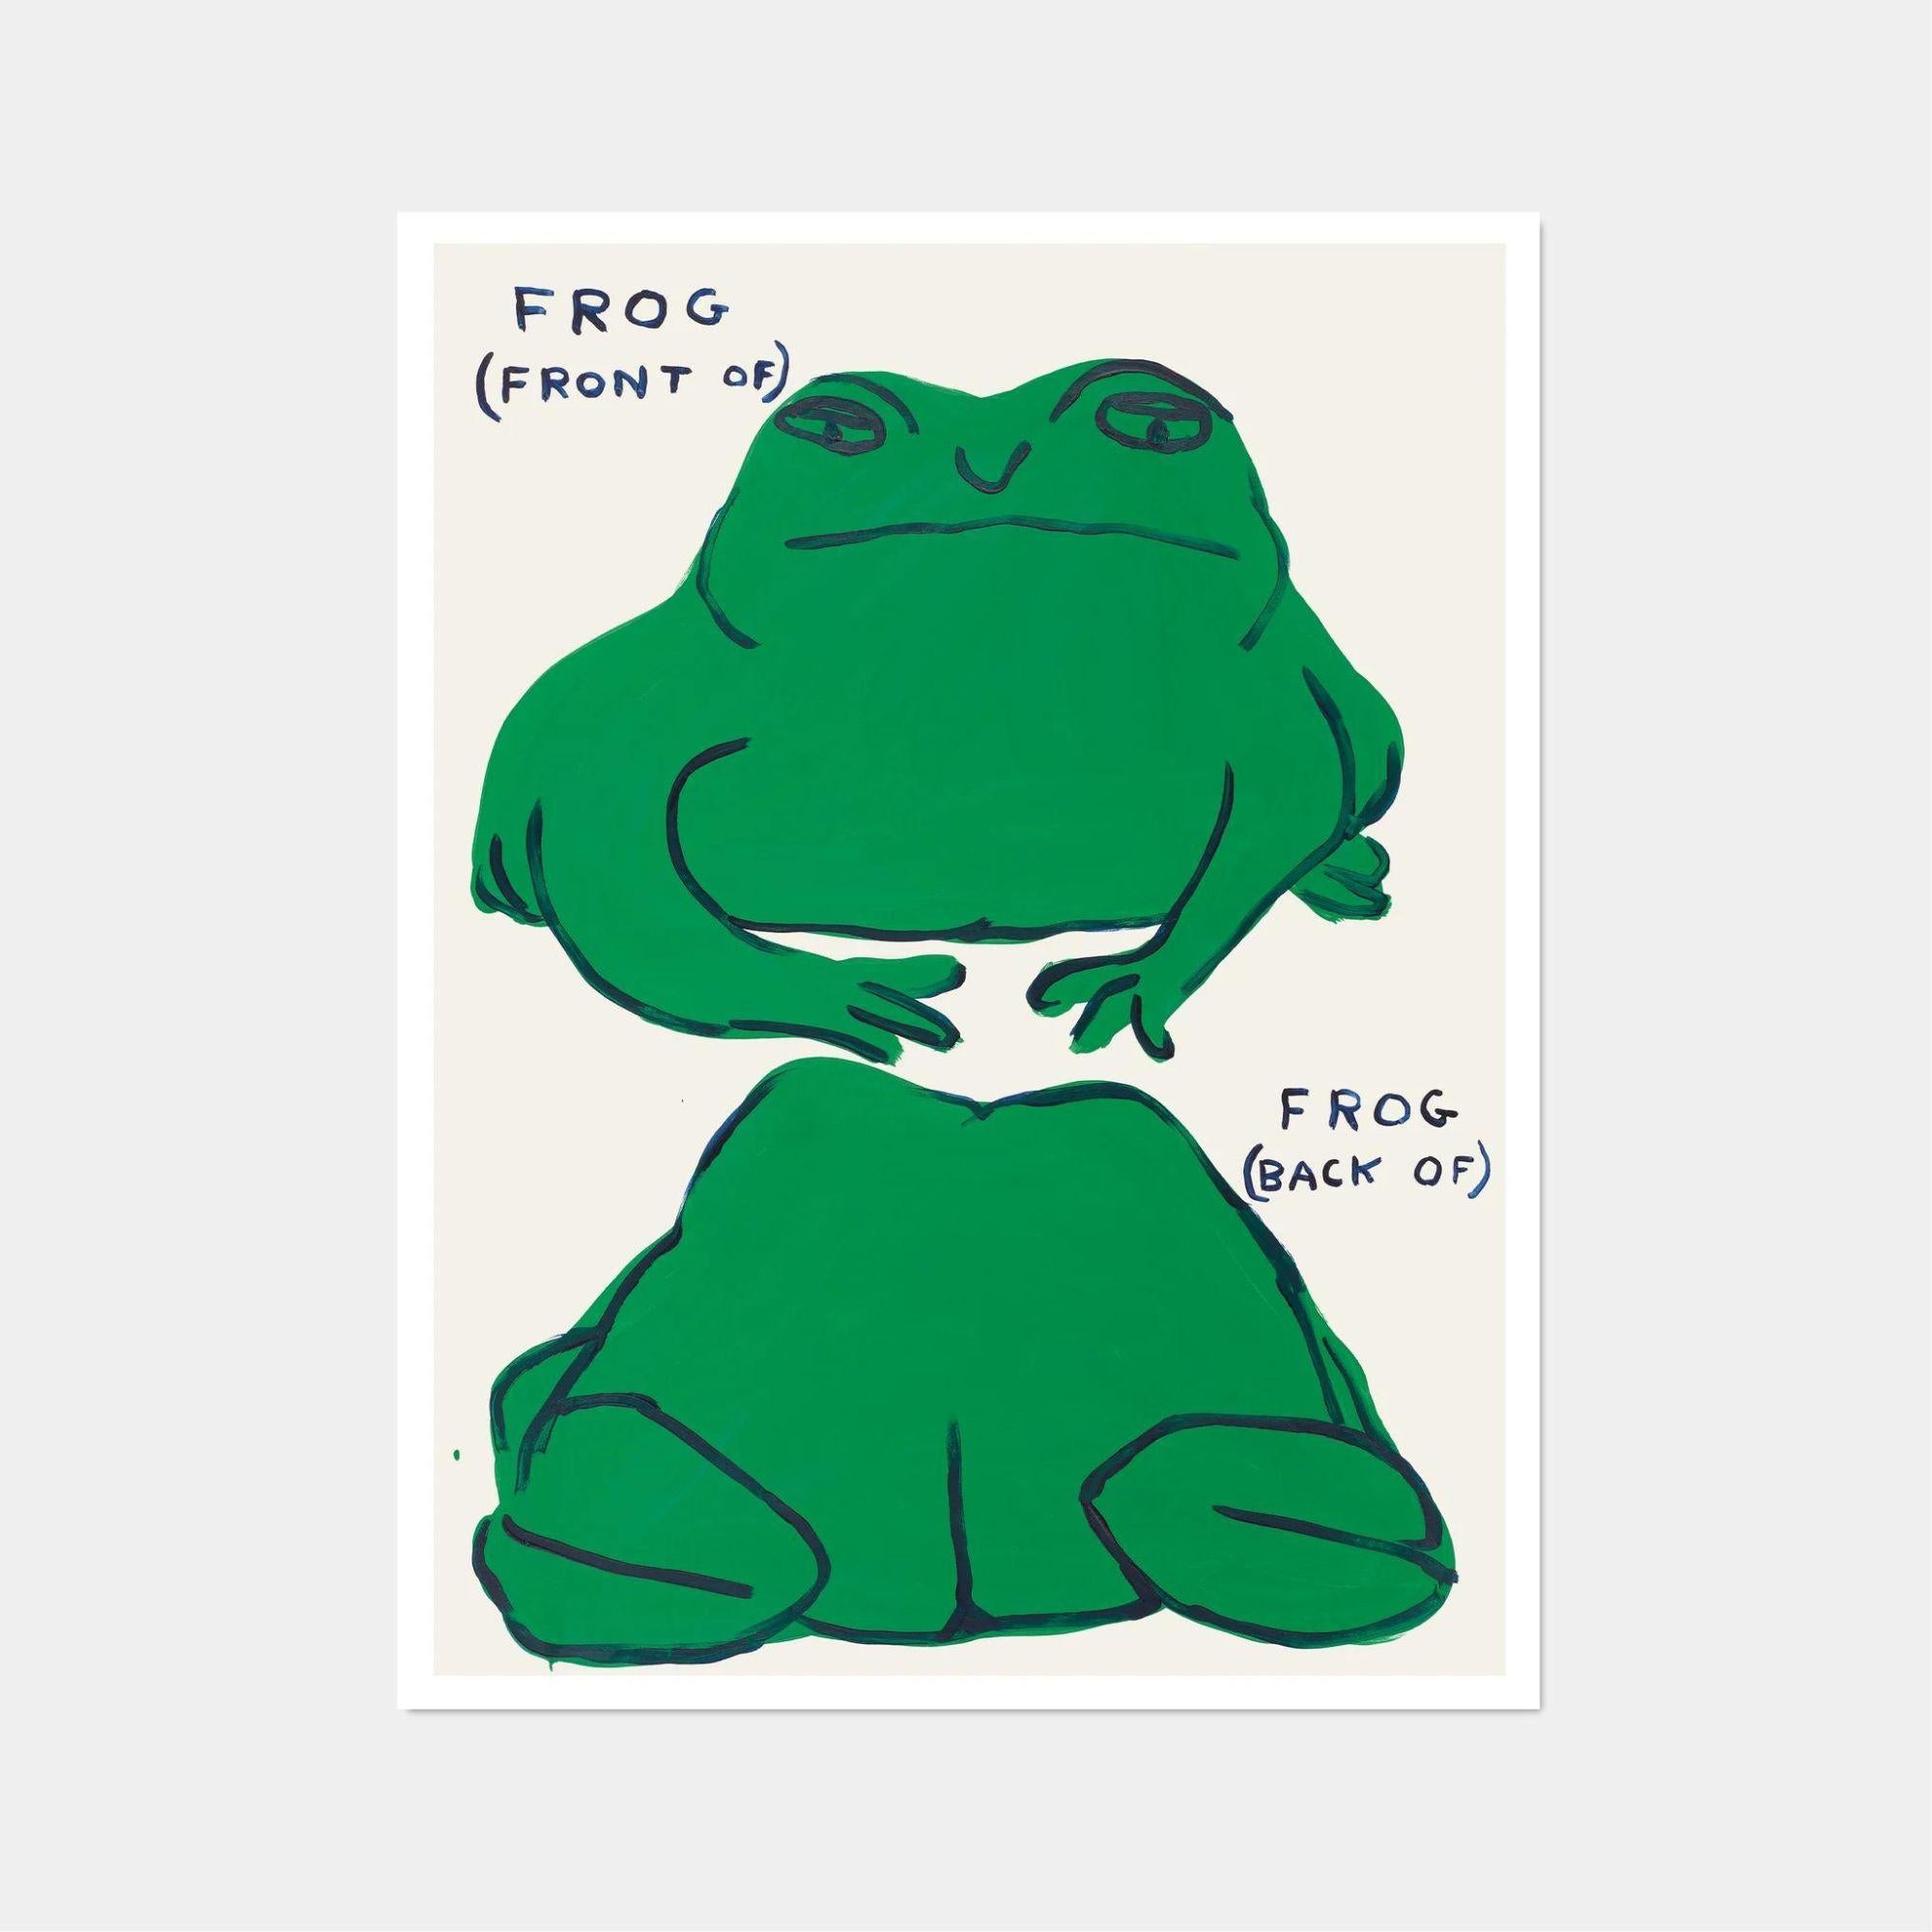 Frog (front of), Frog (back of) - Print by David Shrigley